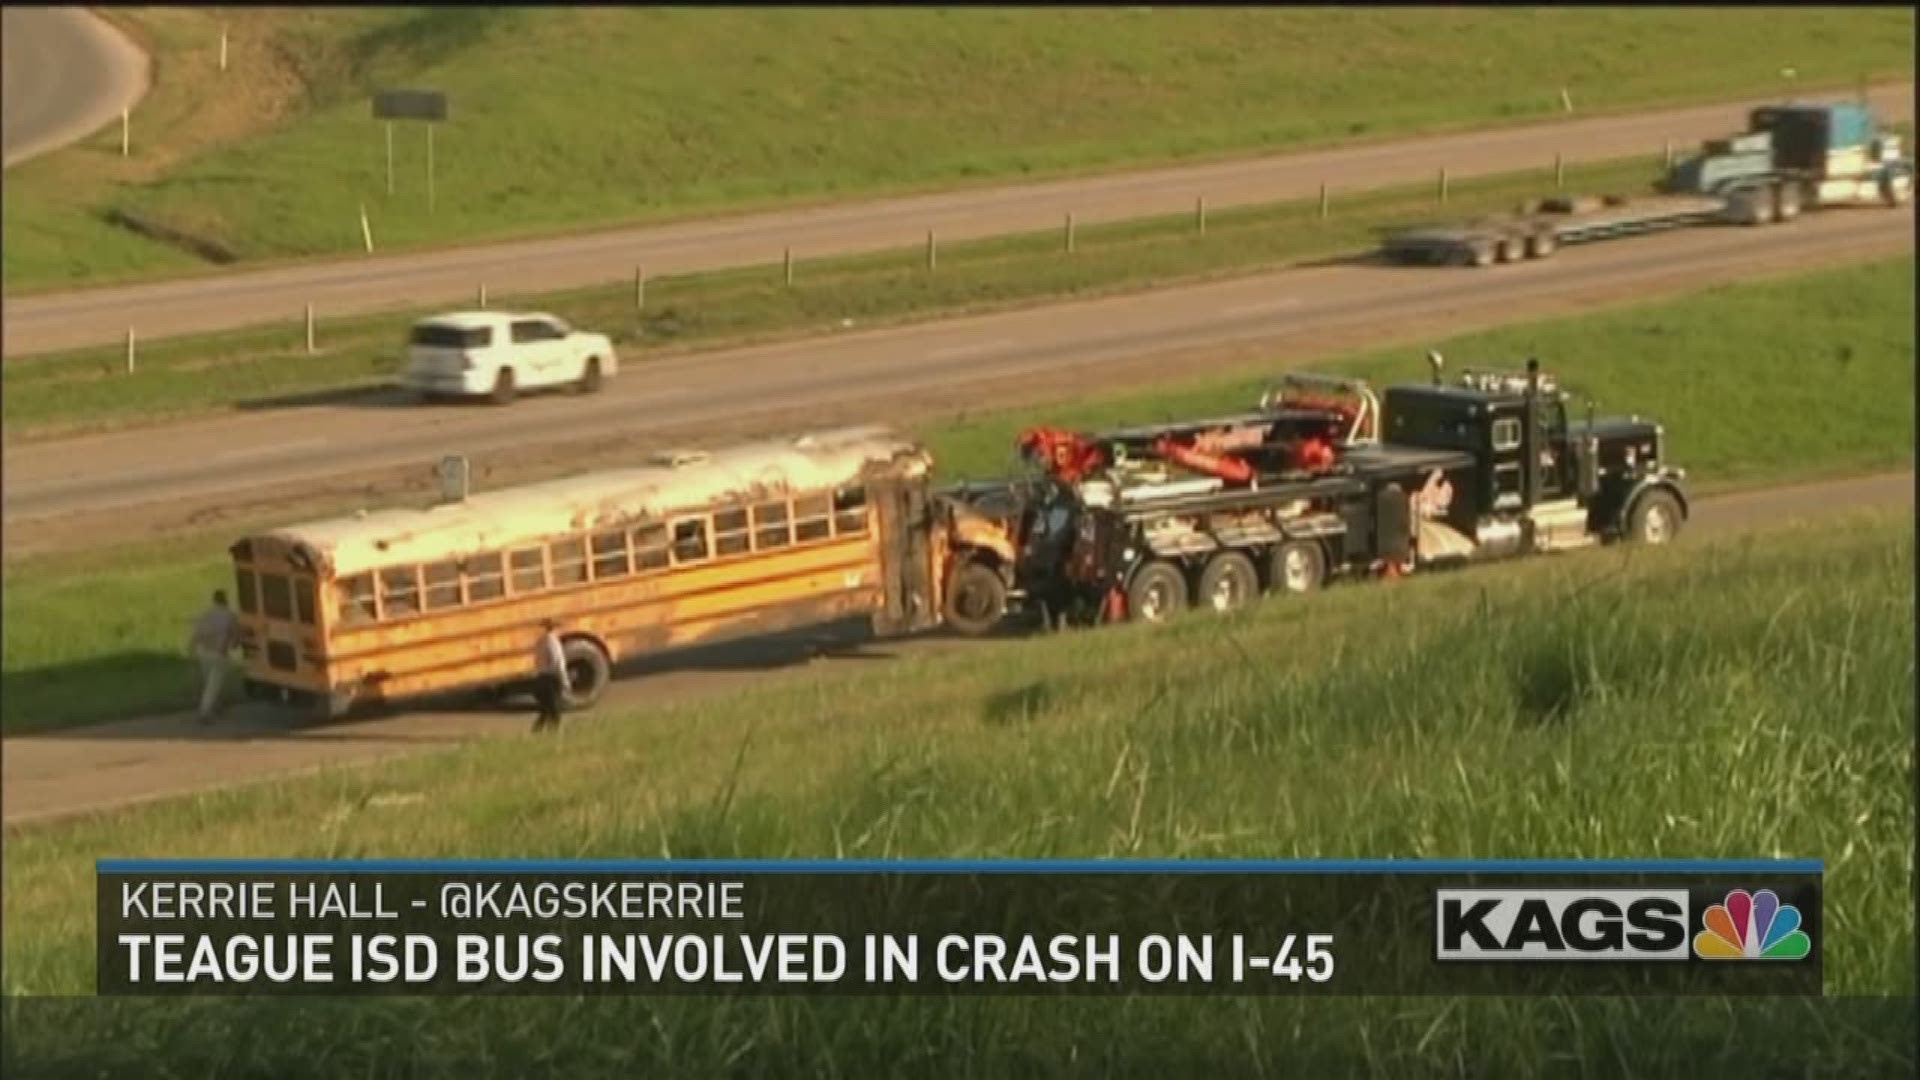 A Teague ISD school bus overturned on I-14 with students on board.